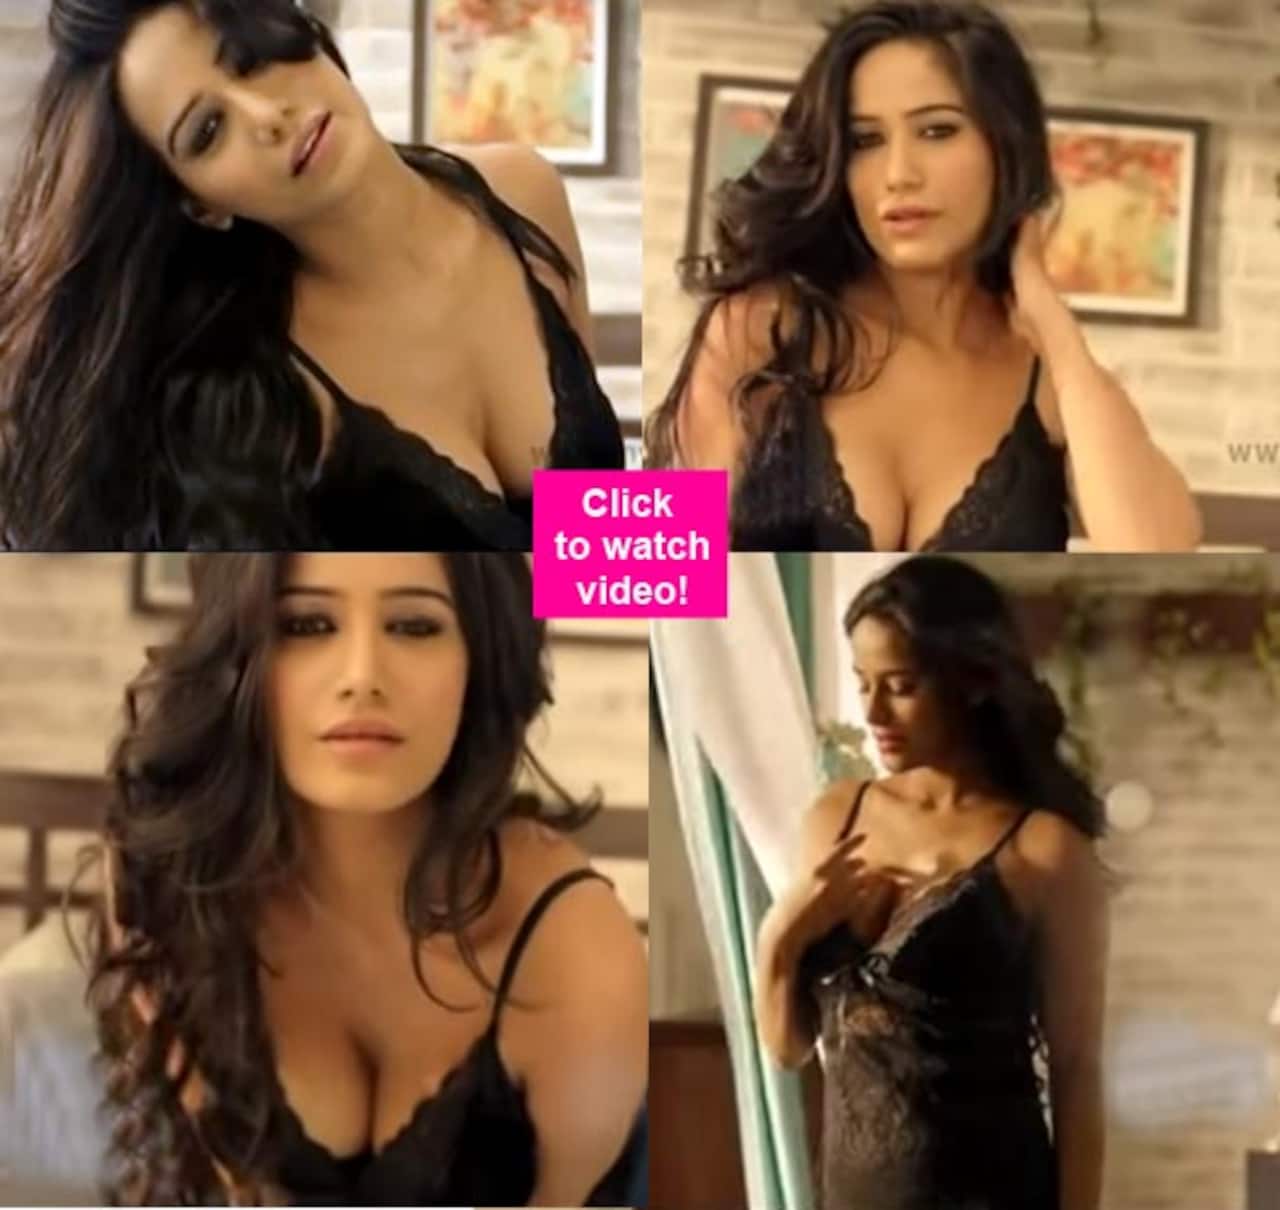 Poonam Pandey's sexy image earns her a breast enhancing commercial - watch video!